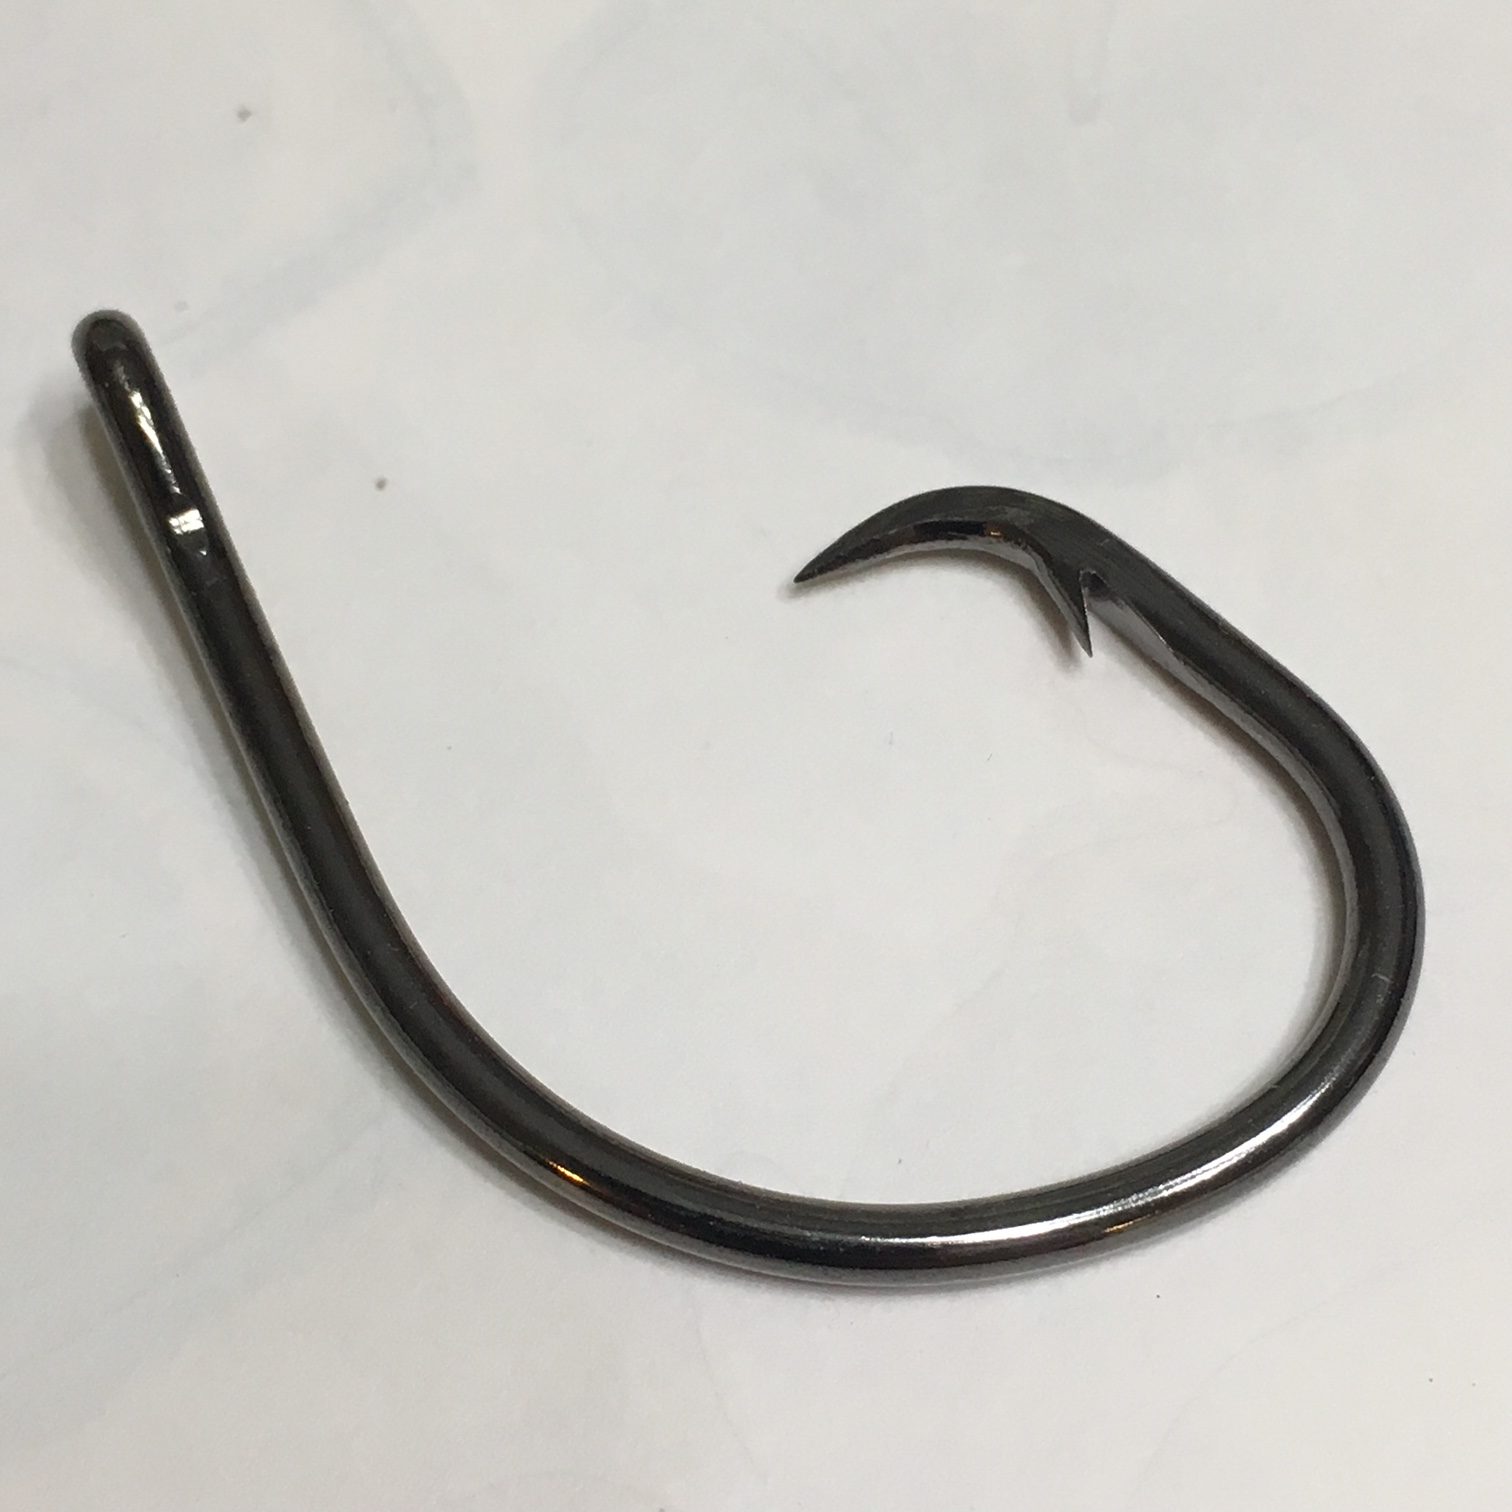 3 Reasons You Should Use Circle Hooks - The Angler Within All The